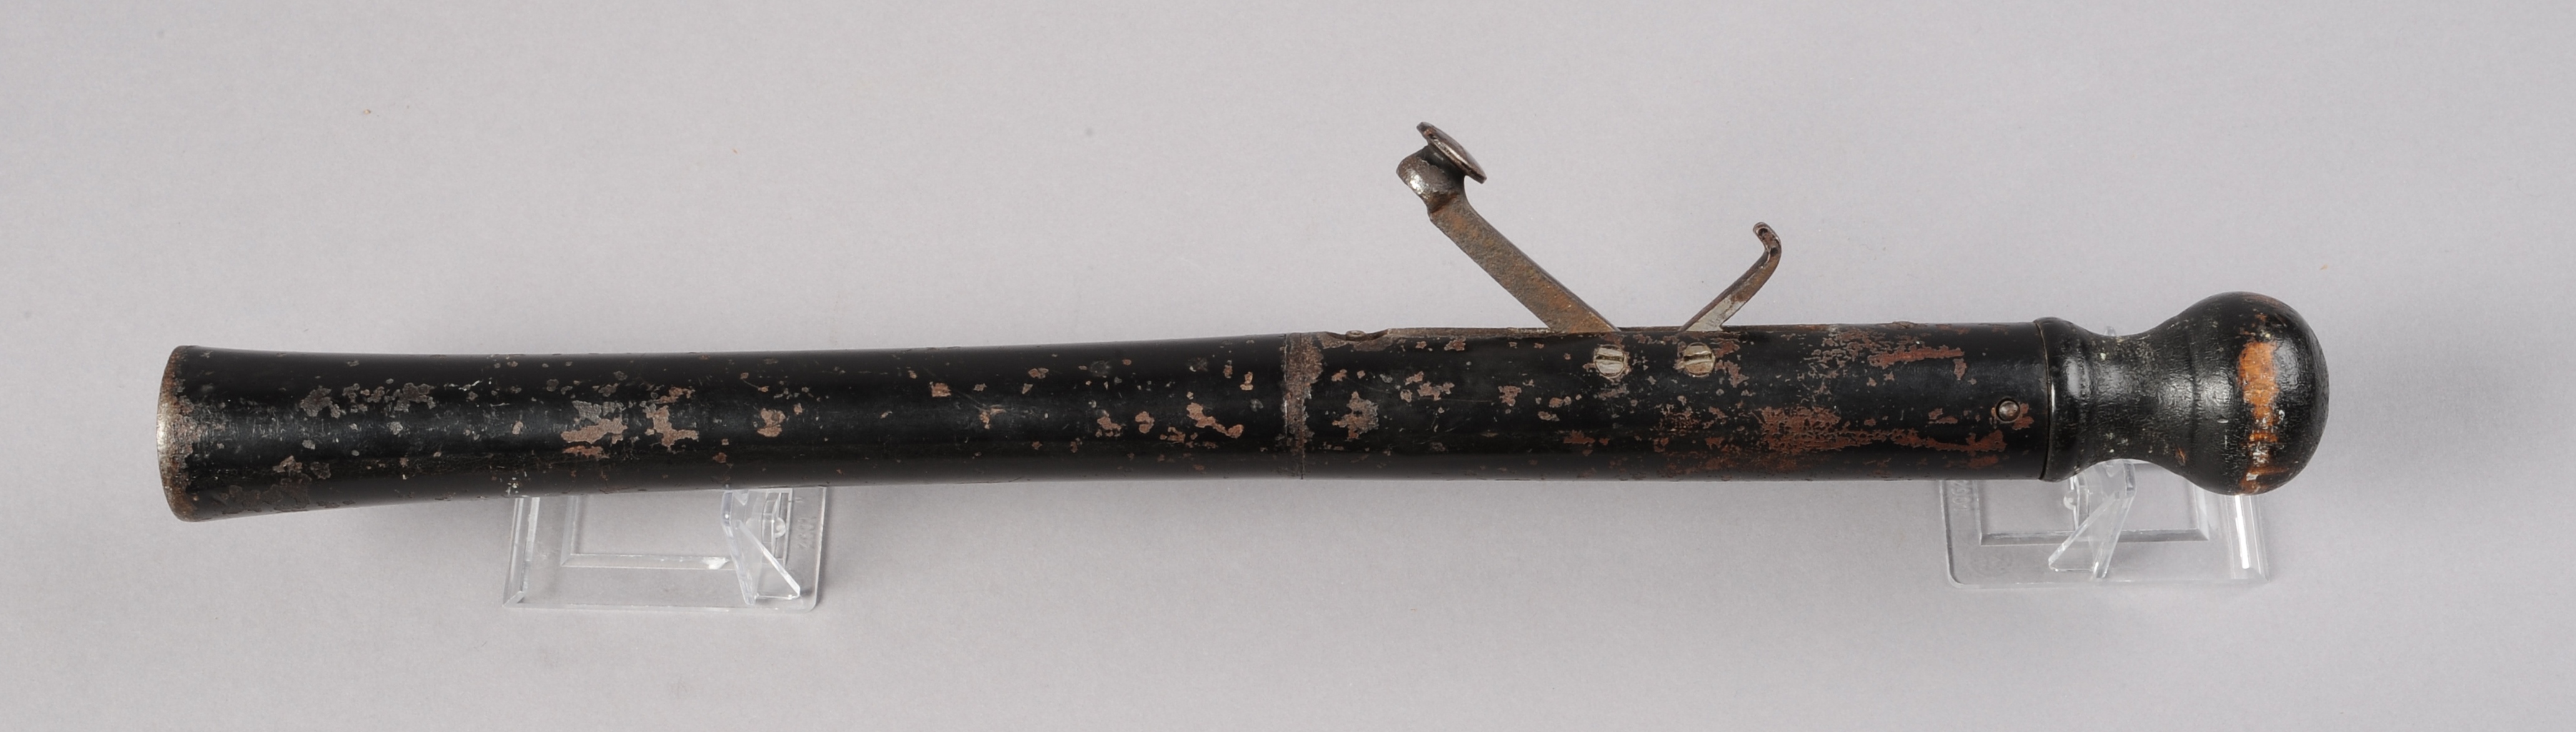 AN EARLY VICTORIAN PERCUSSION PISTOL, formed as a truncheon, the black-enamelled barrel with